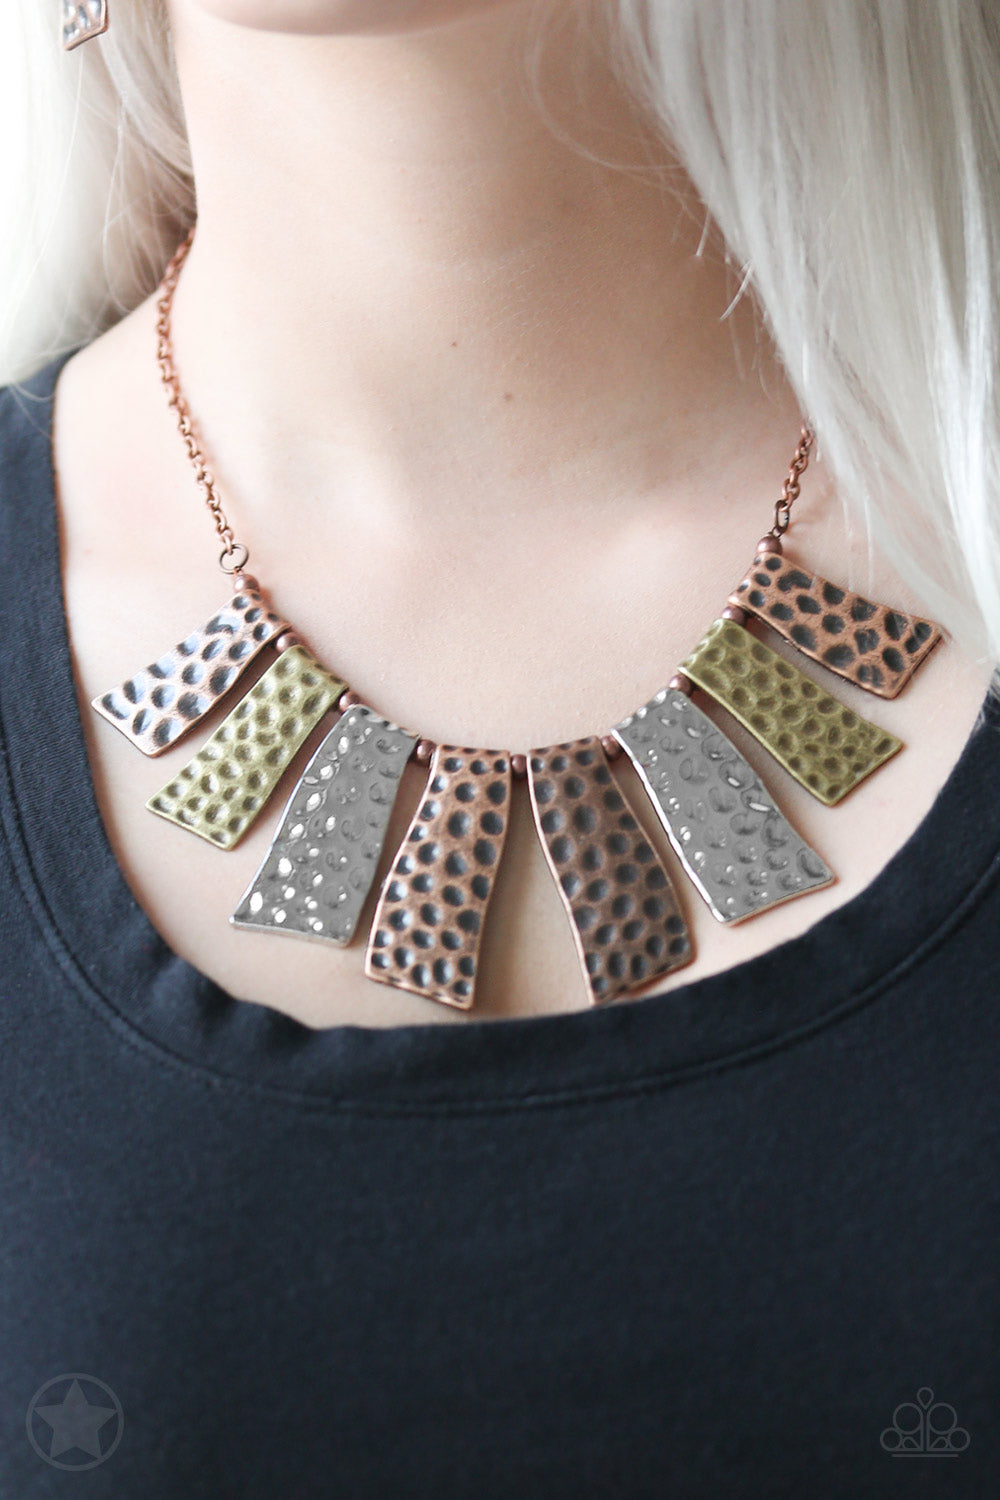 A Fan of the Tribe - Paparazzi necklace